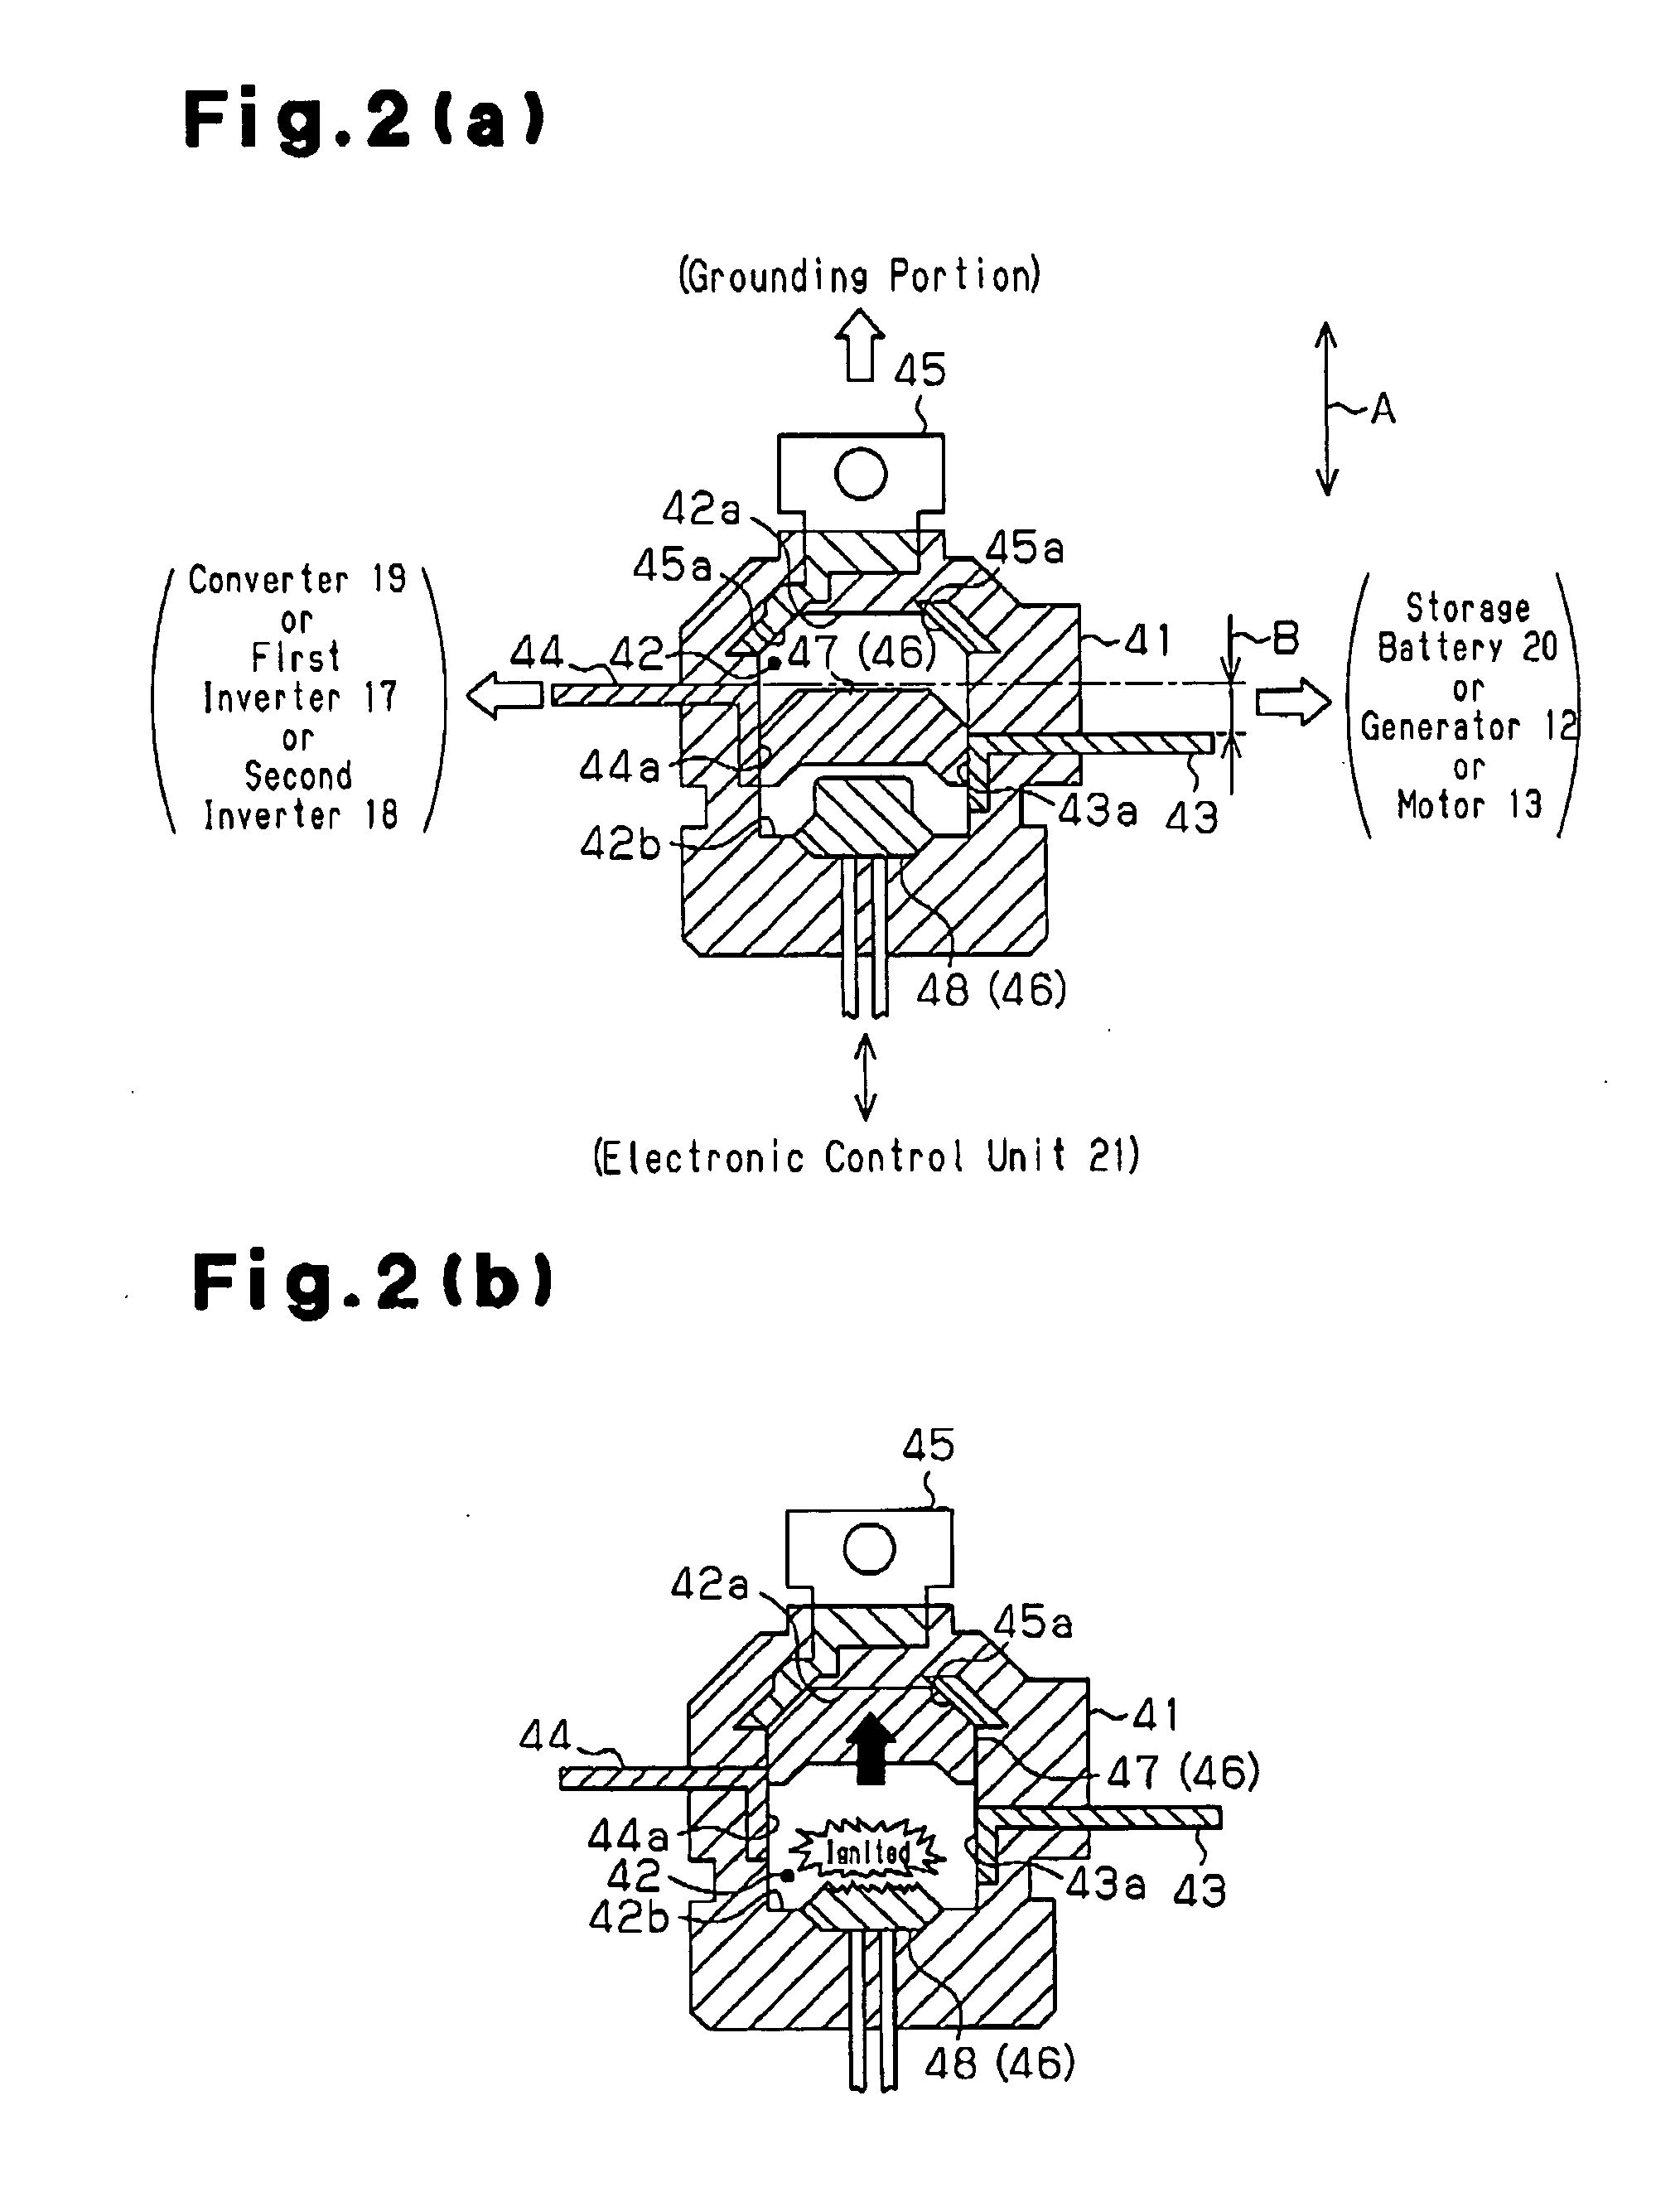 Electric circuit breaker apparatus for vehicle